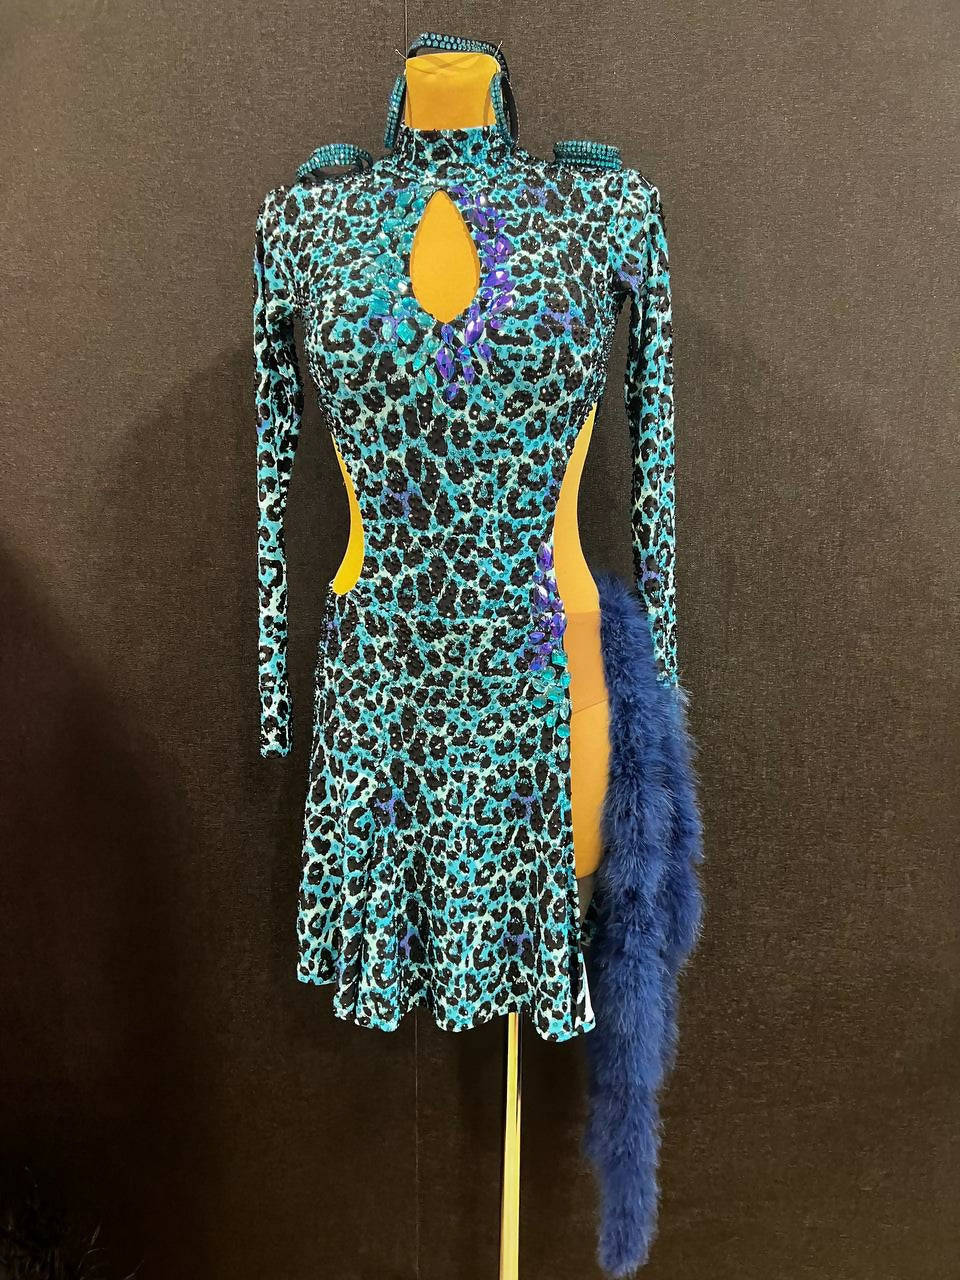 New latina dress_ The Turquoise Leopard